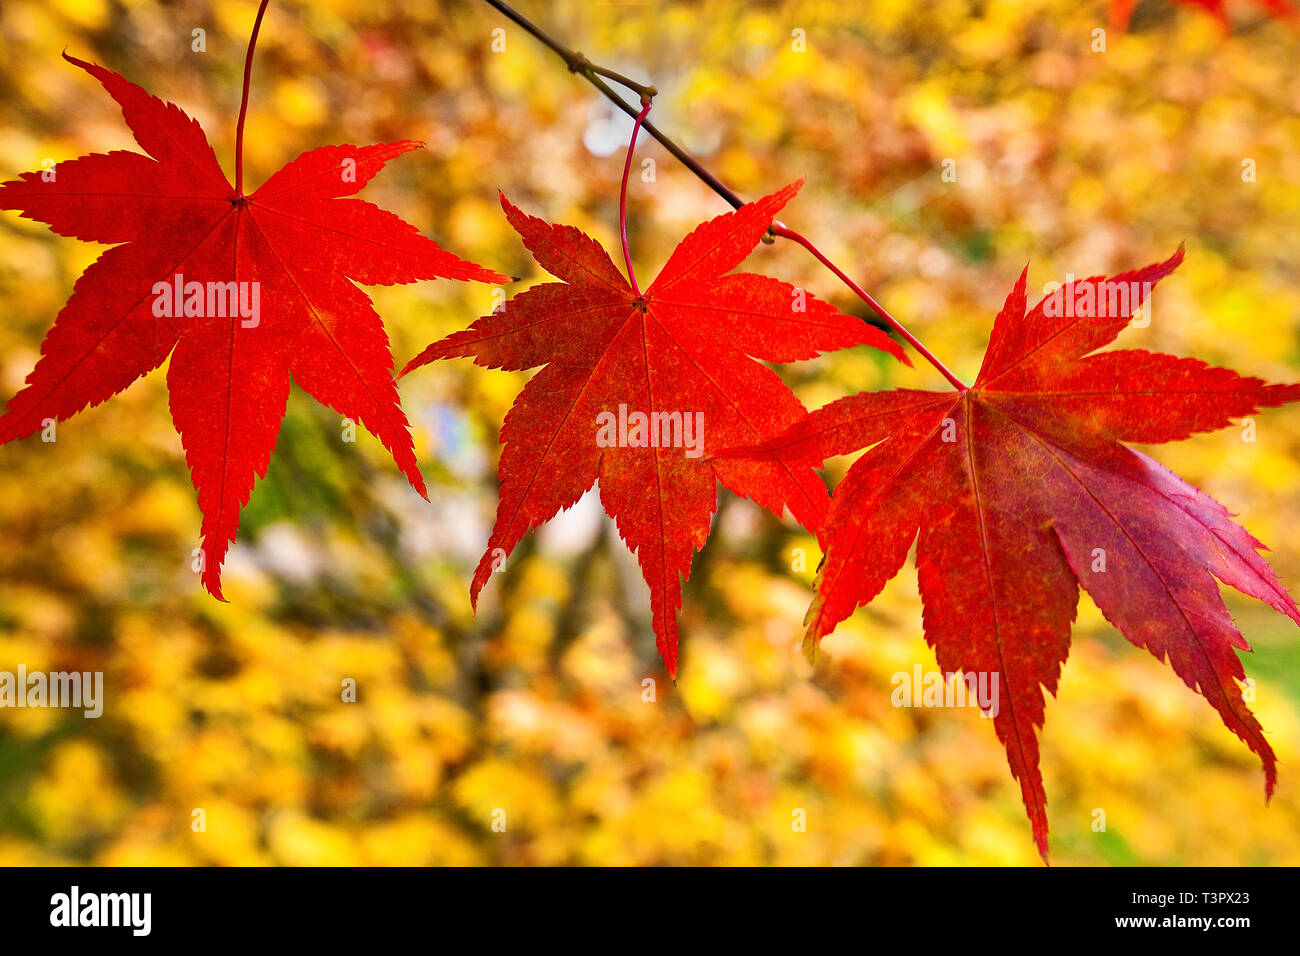 Red Japanese Maple leaves in Autumn, with a colouful yellow background. Stock Photo